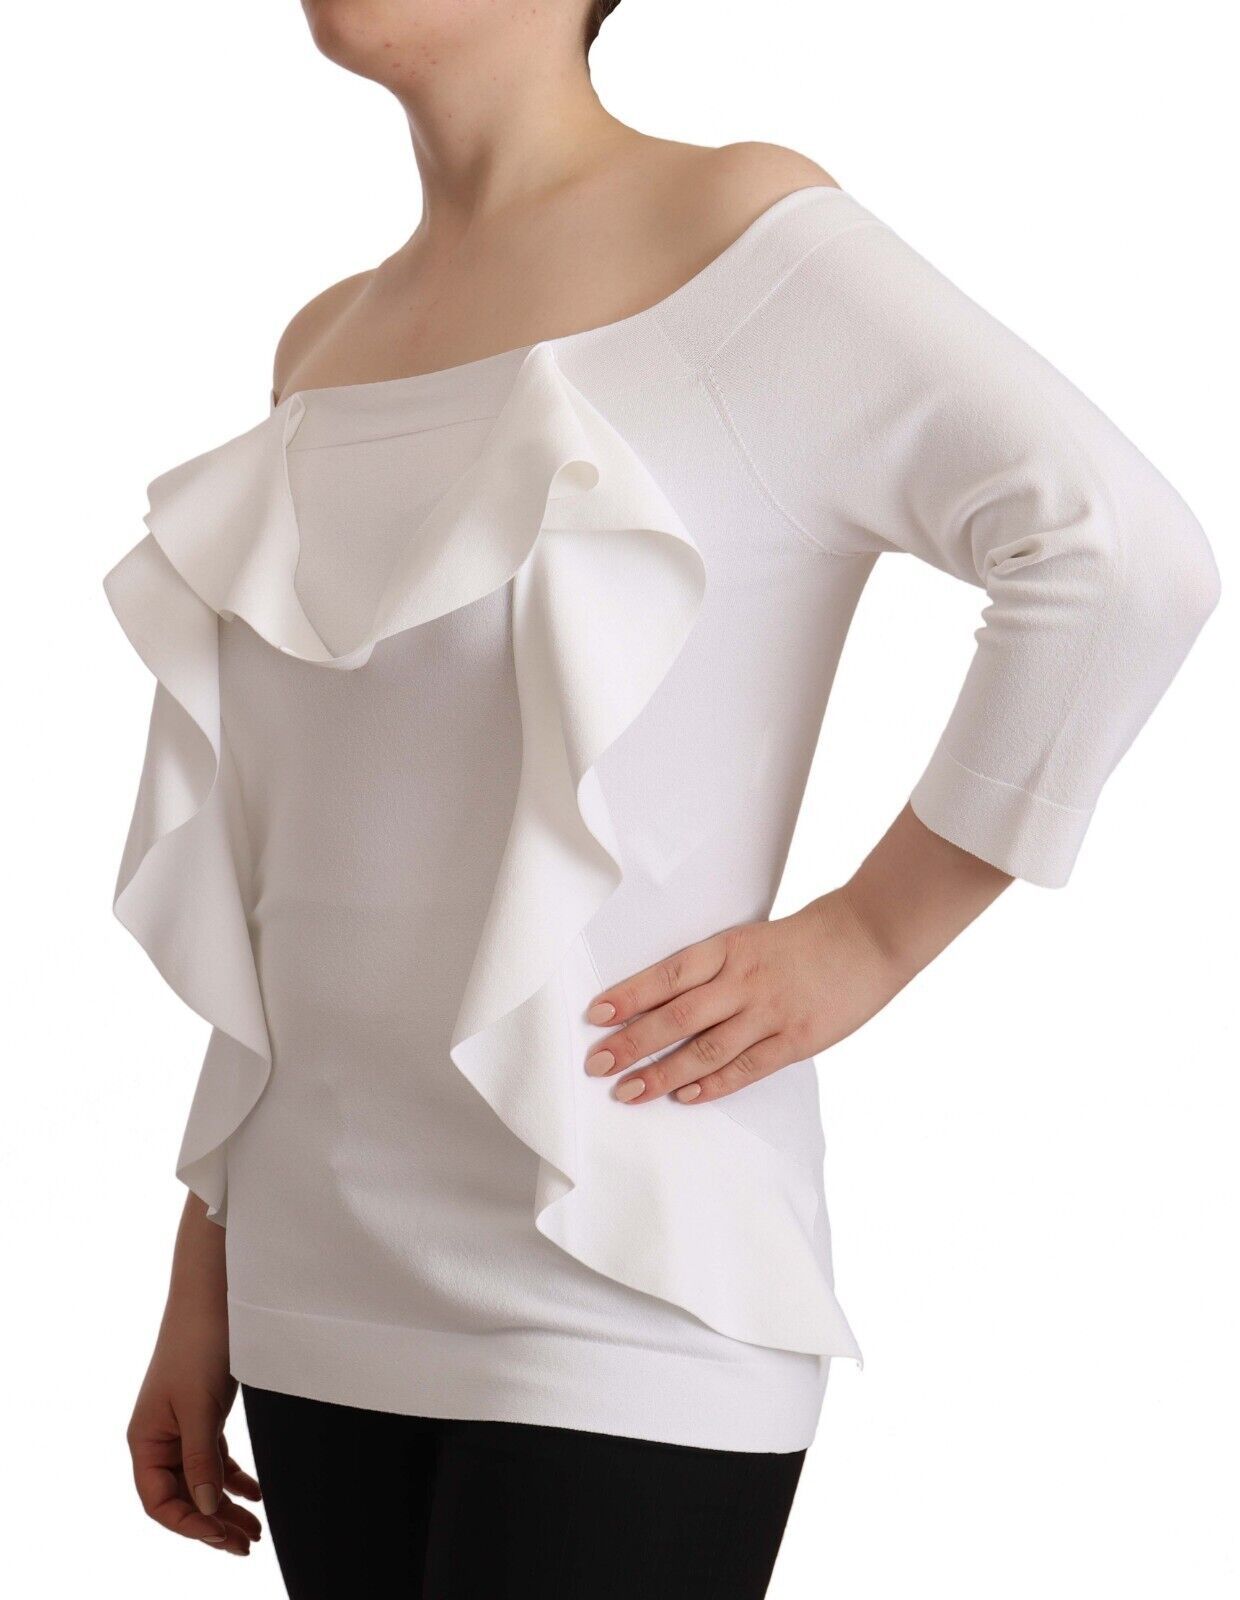 EXTERIOR White Long Sleeves Off Shoulder Women Top Blouse